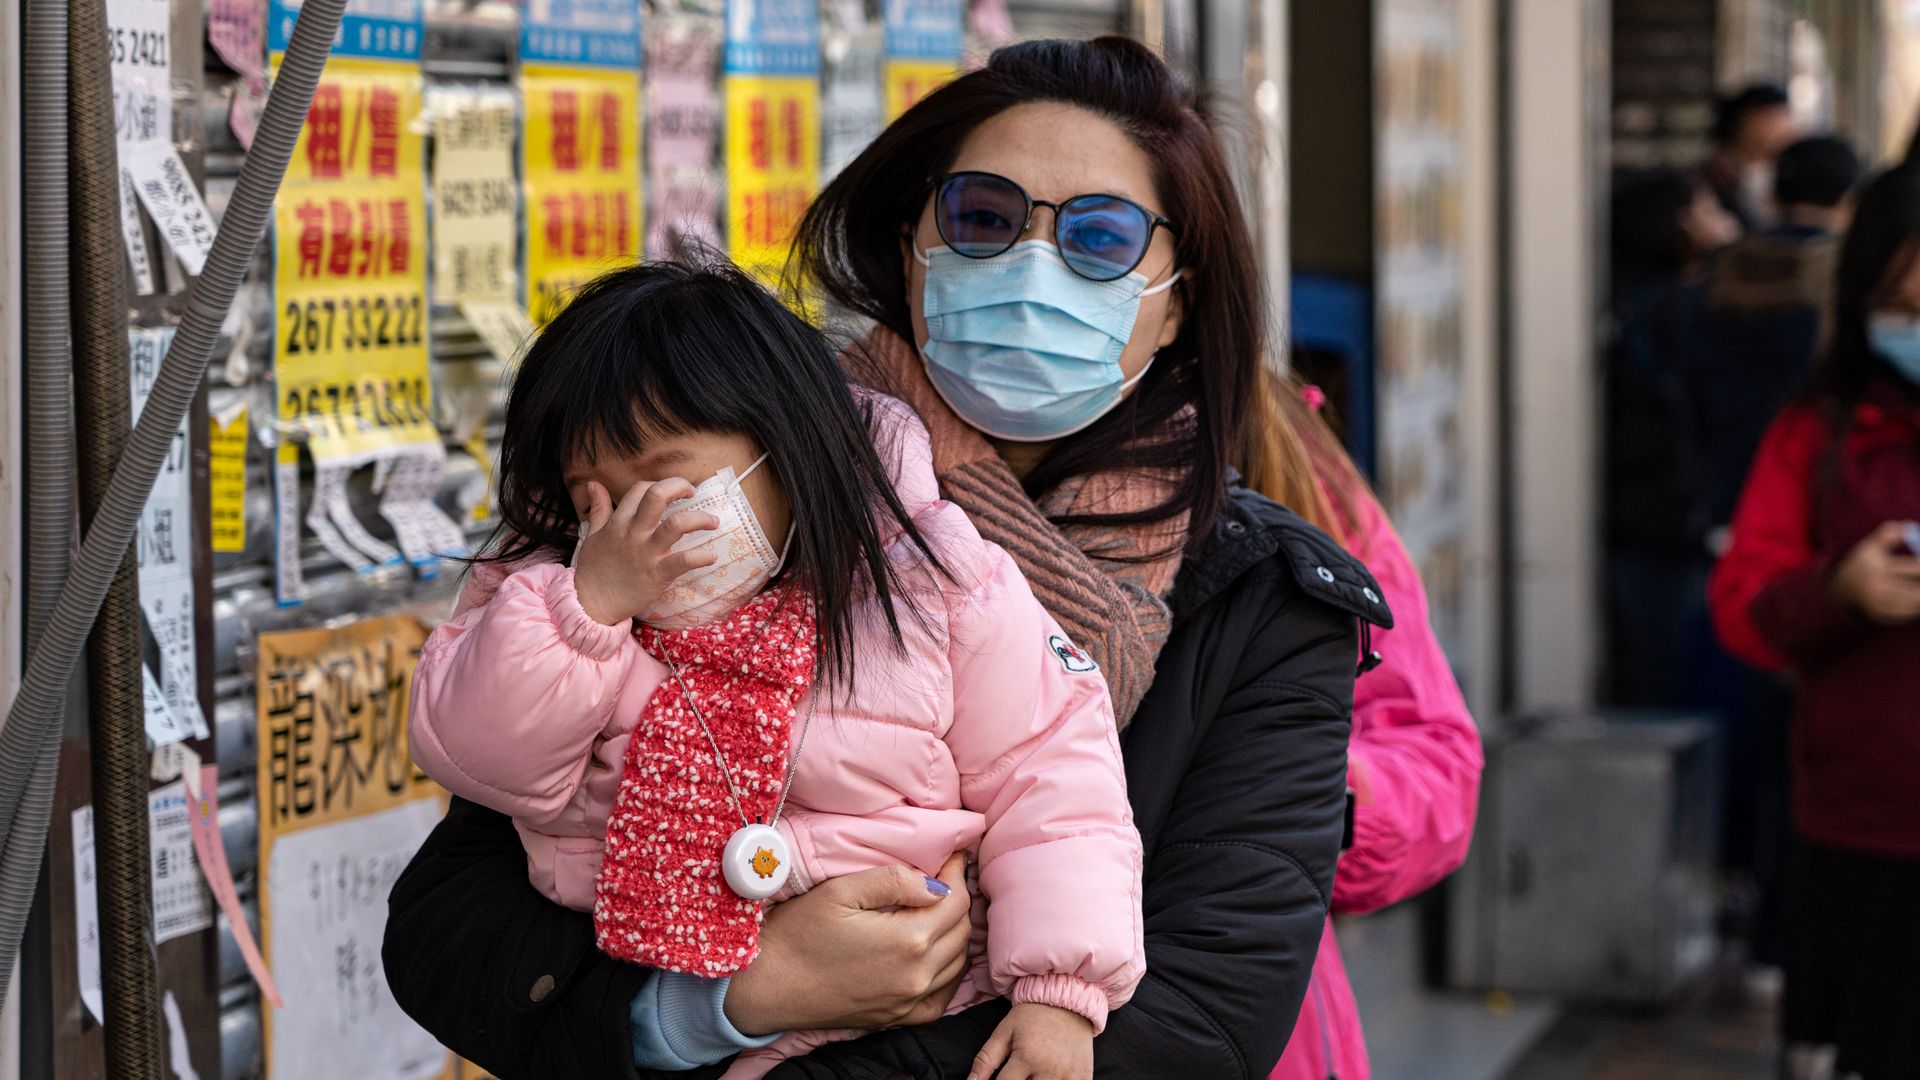 In this image, a mother holds her child as they both wear face masks in Hong Kong